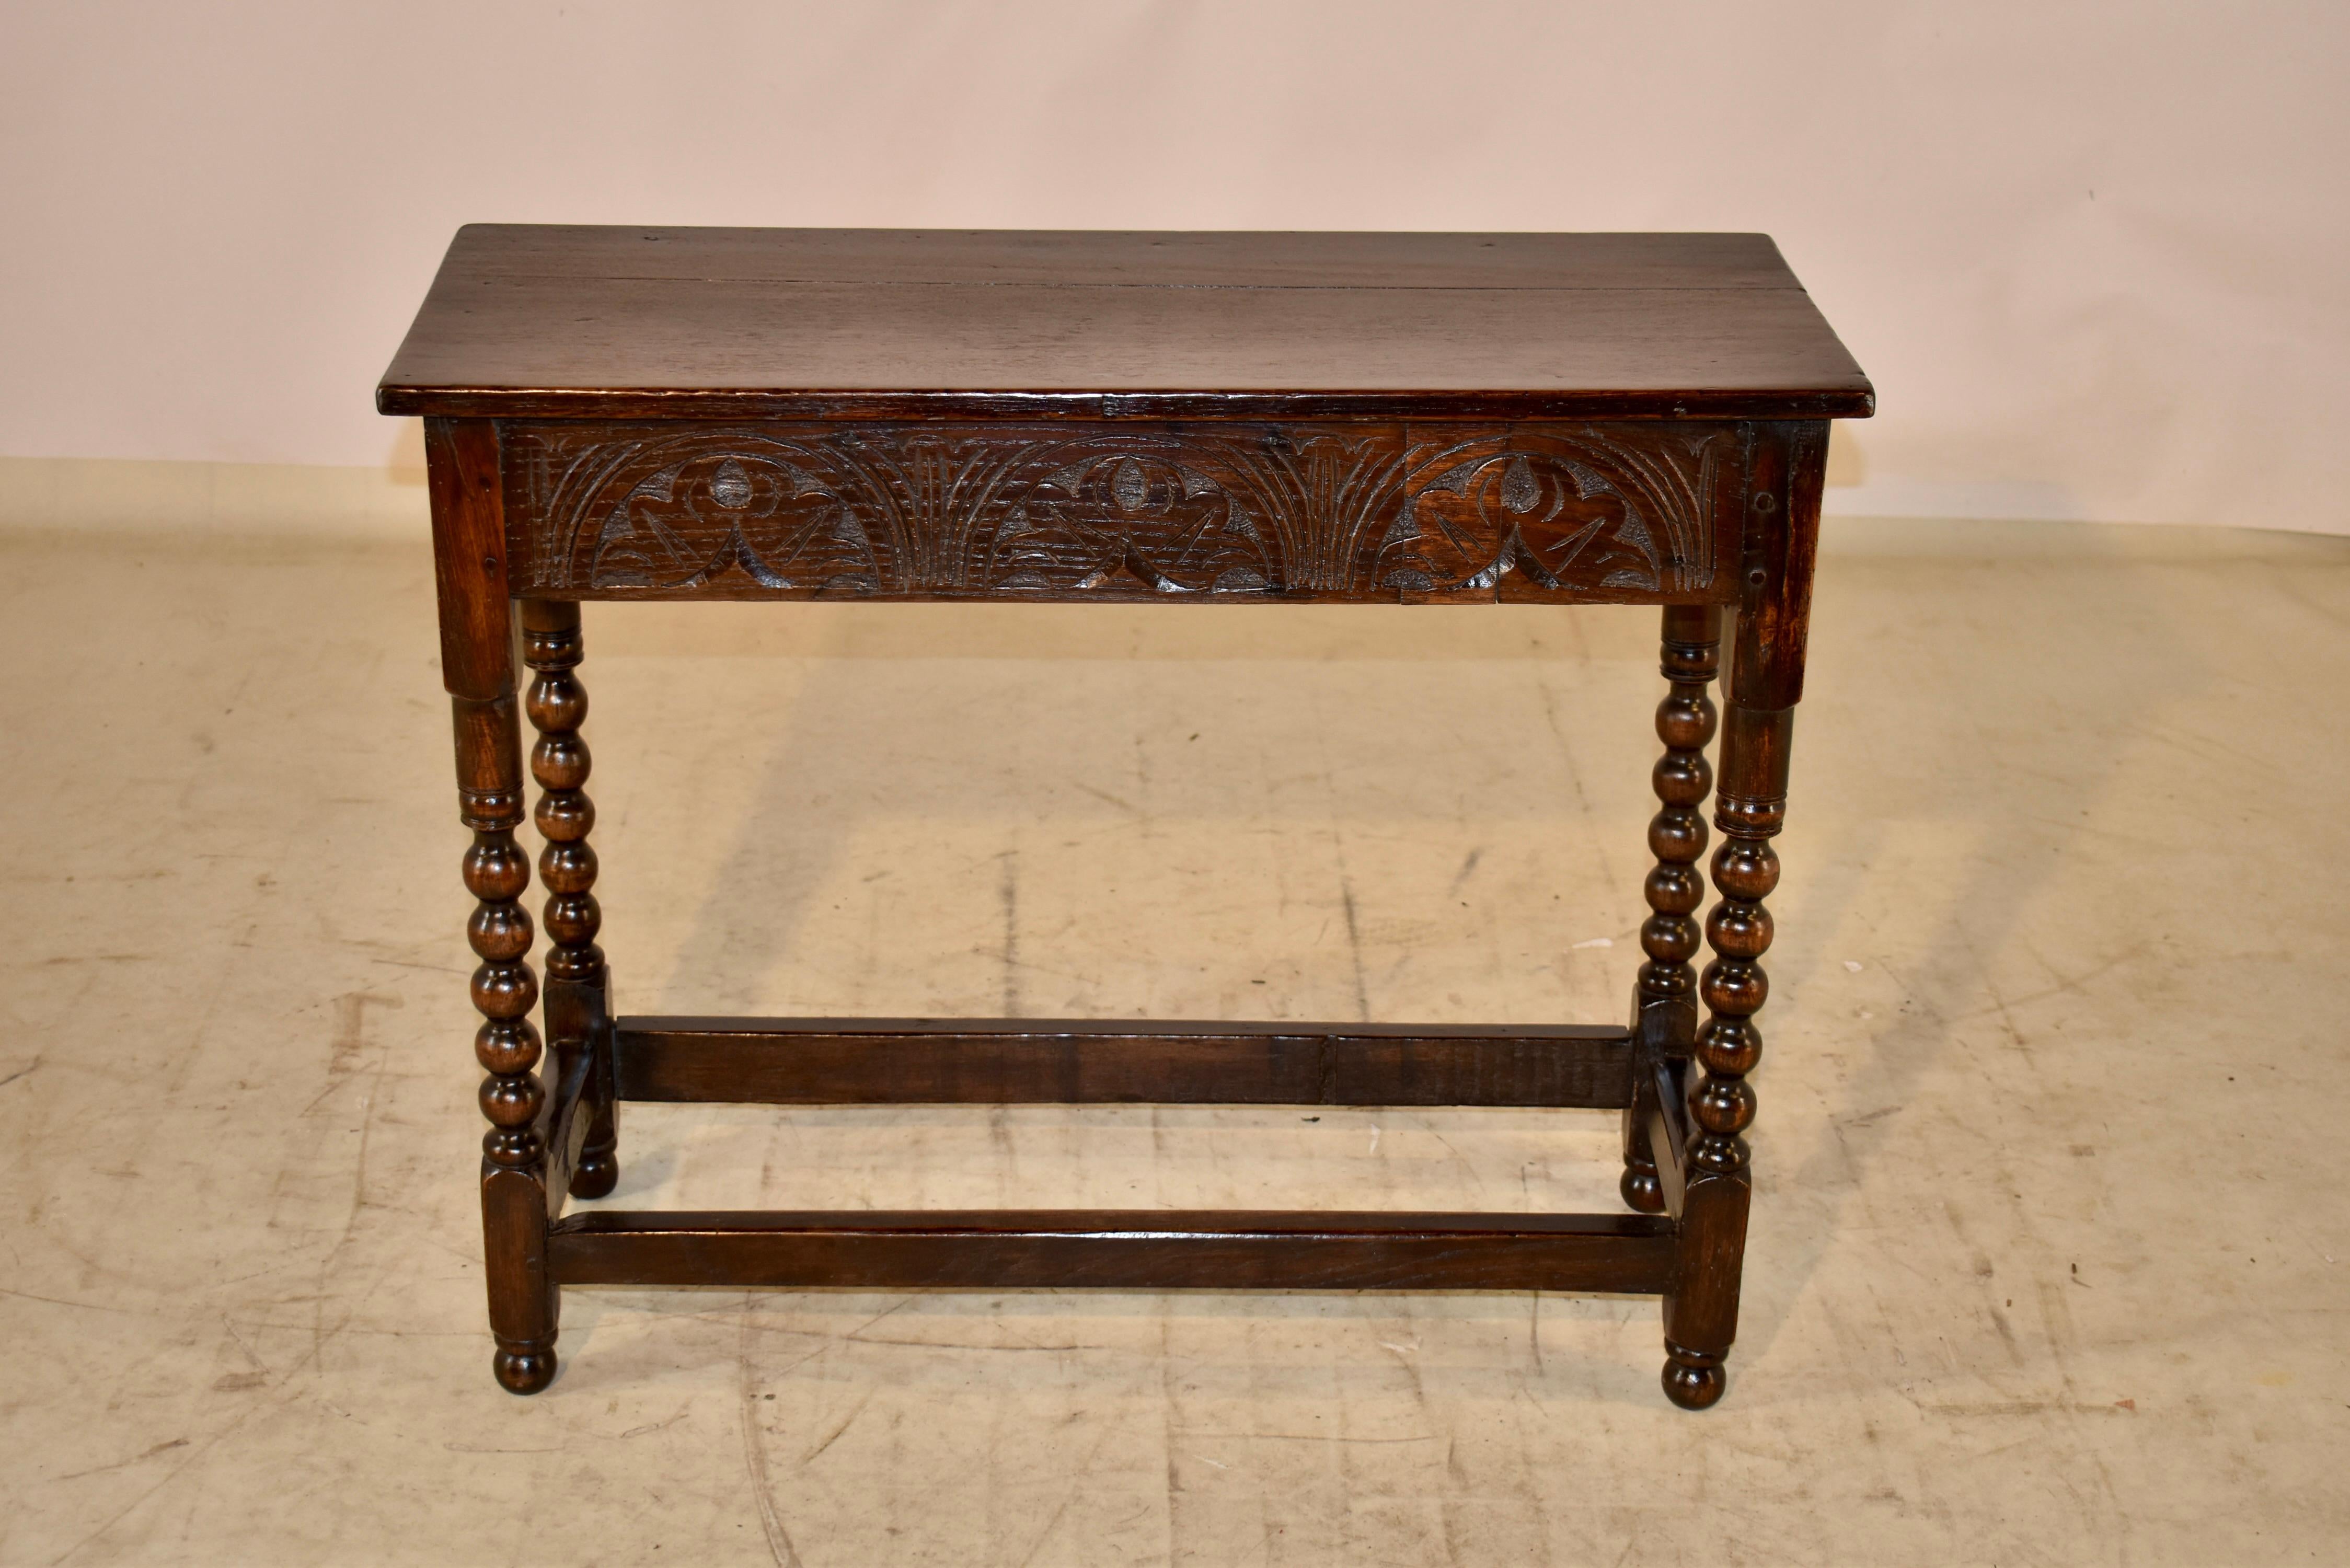 18th century oak side table from England. The top is made from two planks and follows down to a lovely hand carved apron. The apron is carved on all four sides for easy placement in any setting. The table is supported on hand turned bobbin legs,